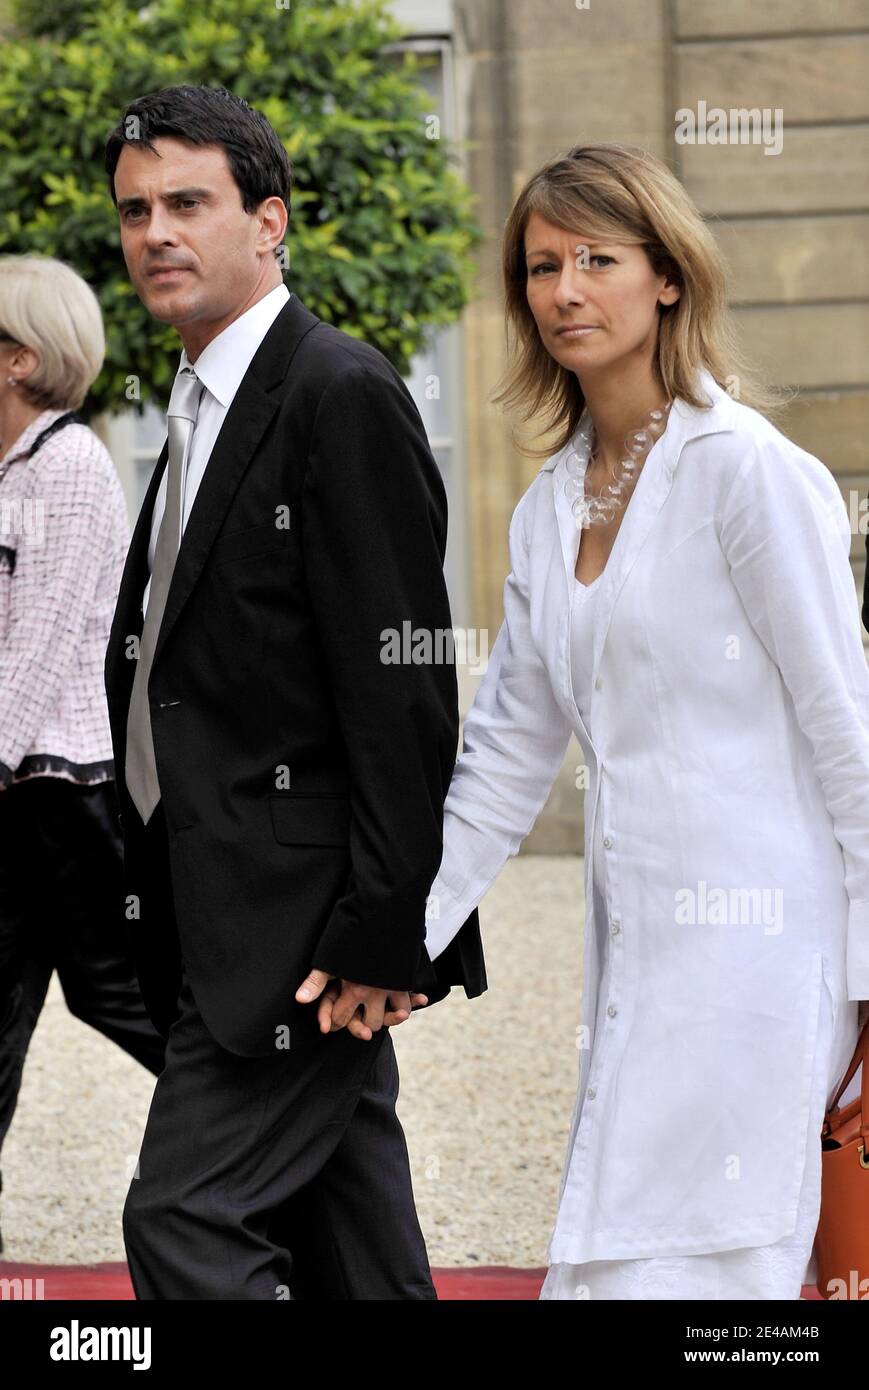 Manuel Valls and his companion Anne Gravoin arrive for the Garden Party at Elysee Palace in Paris, France on July 14, 2009. Photo by Christophe Guibbaud/ABACAPRESS.COM Stock Photo